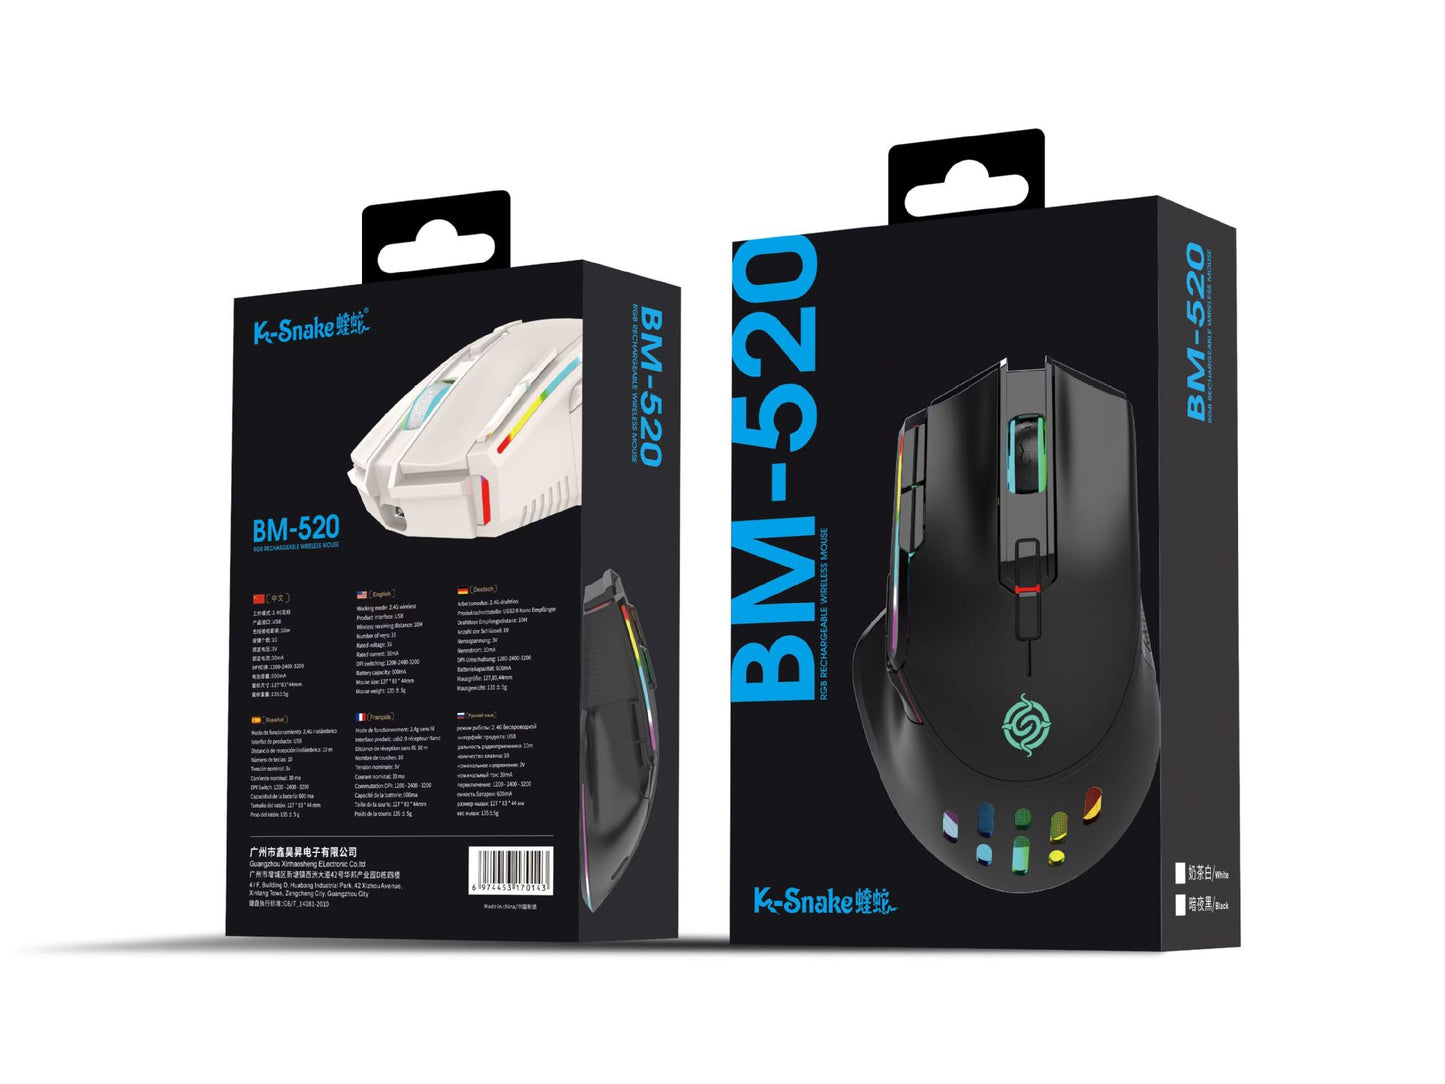 Rechargeable Wireless Gaming Mouse E-sports RGB Colorful